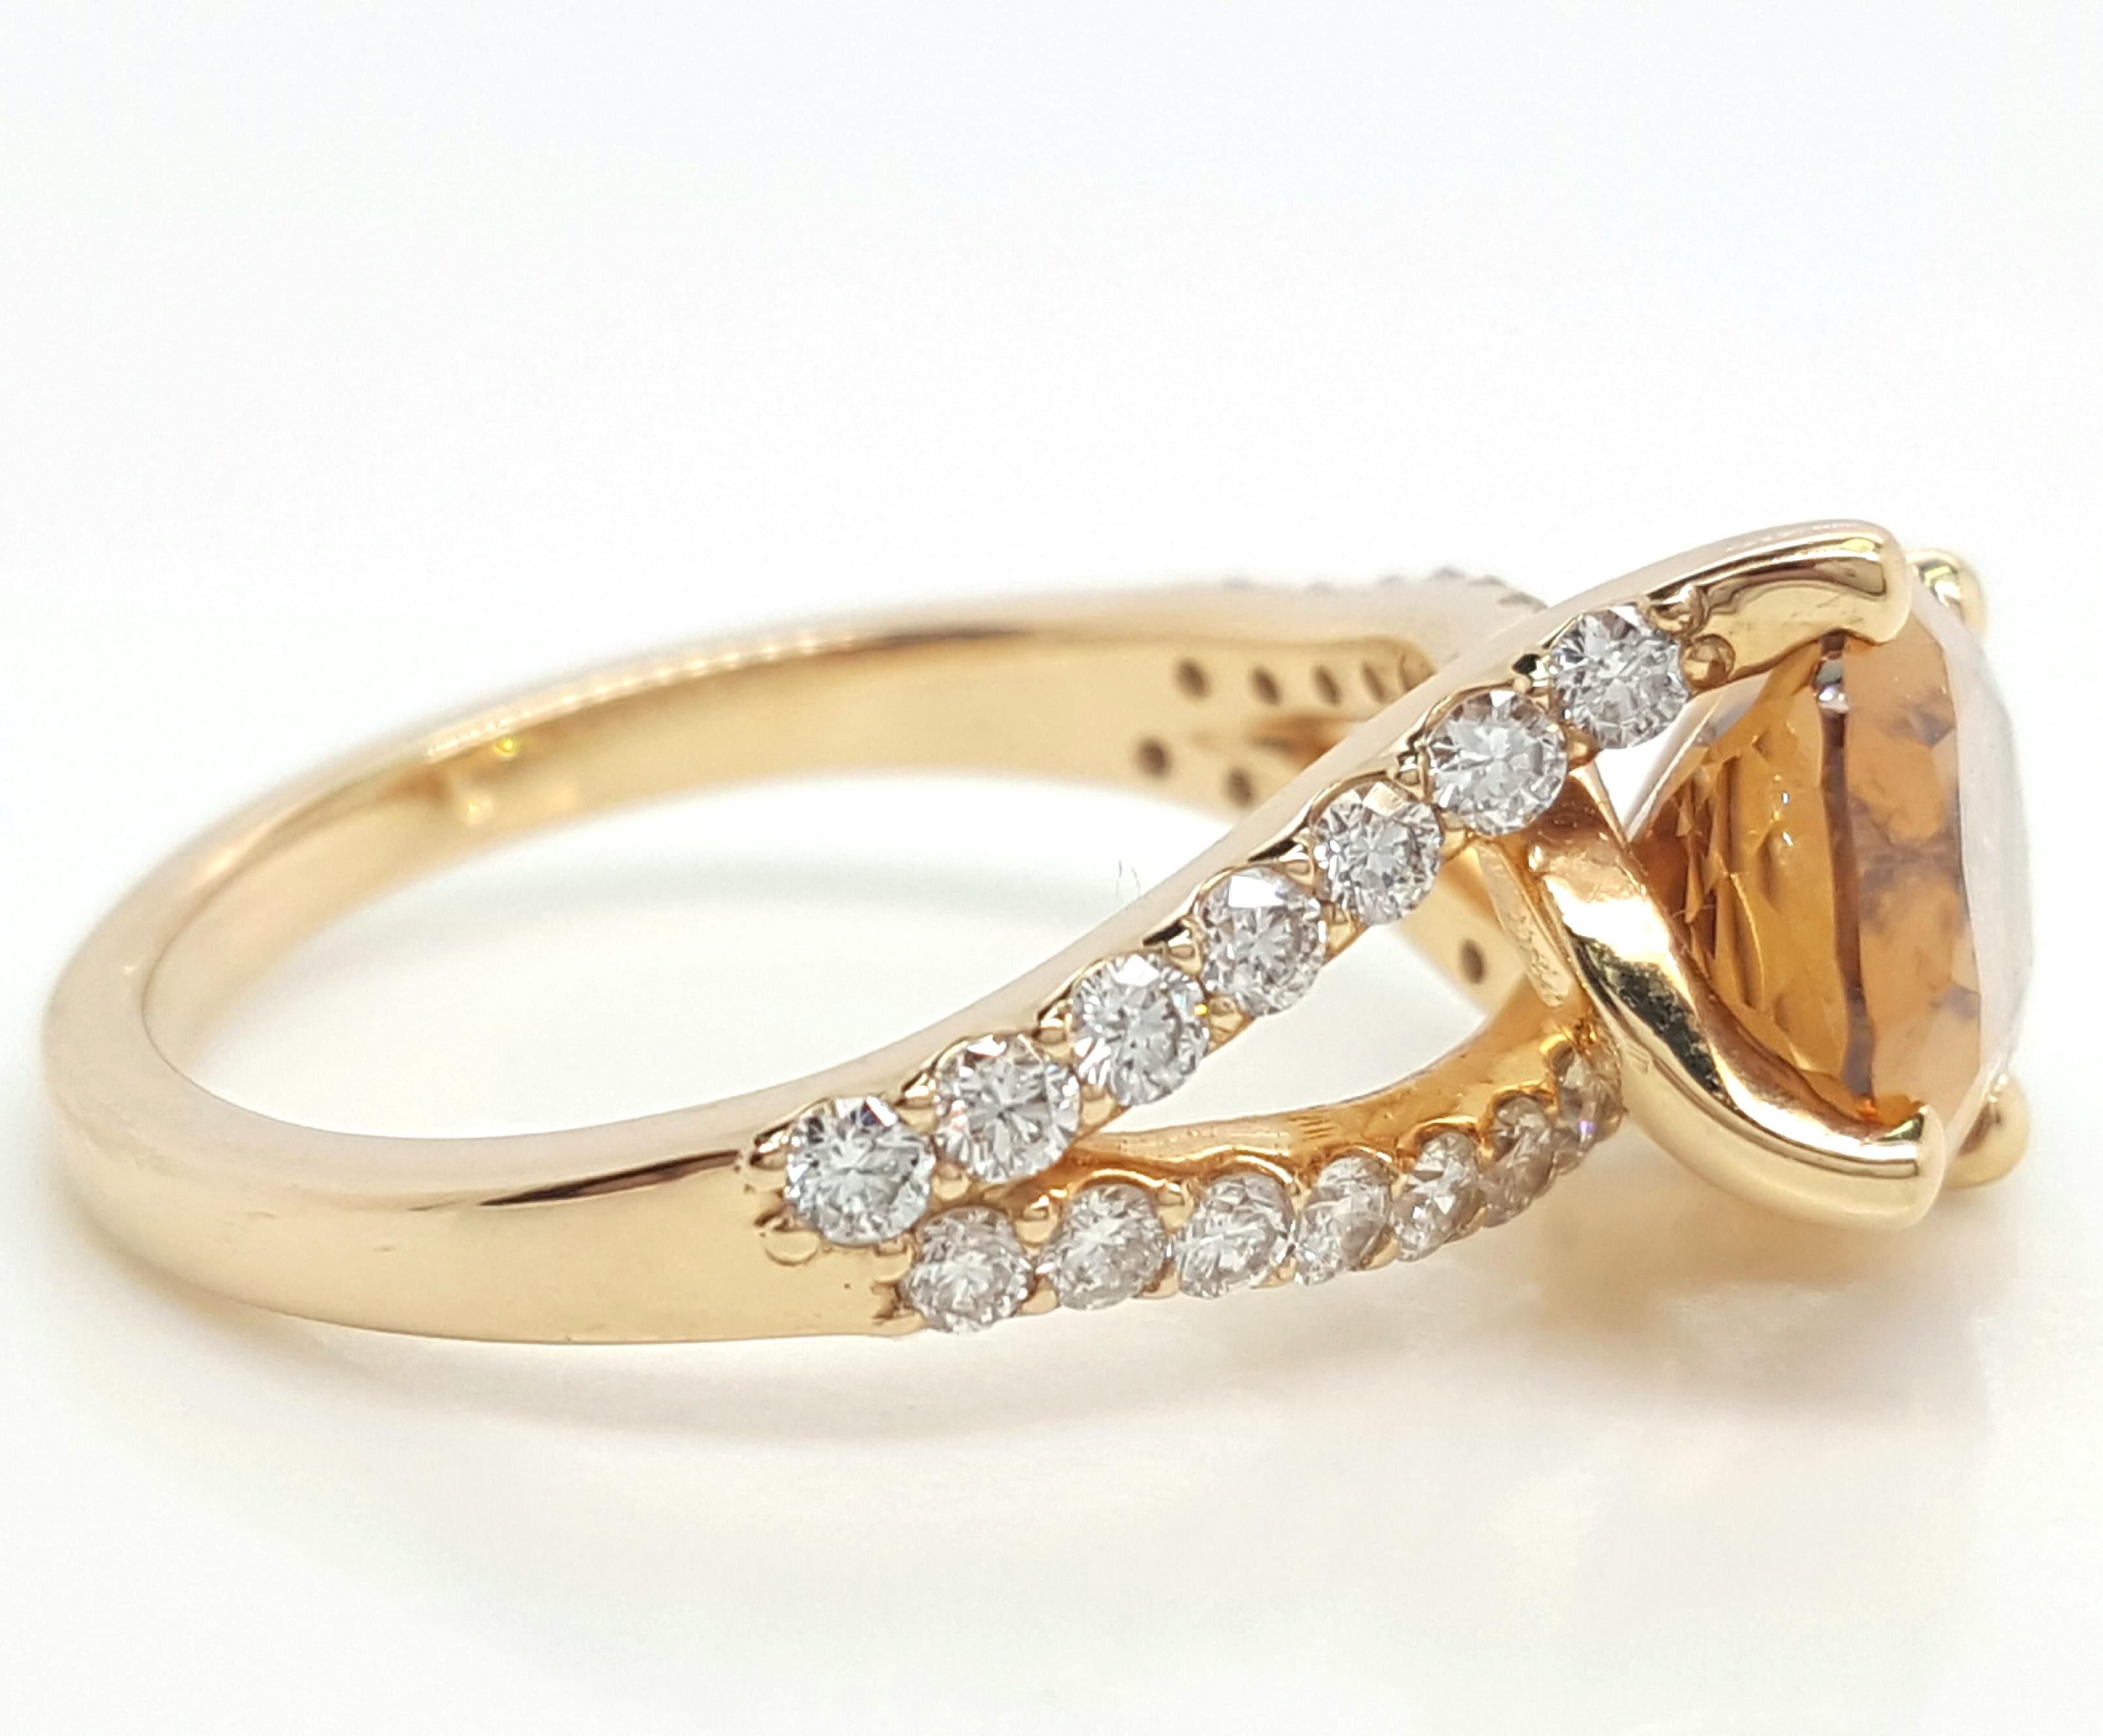 18K Yellow Gold Oval Zircon and Diamond Split Shank Ring.   This romantic ring is crafted with a split shank and trellis prongs holding a vibrant oval citrine weighing approximately 1.89 carats,  The split shank trellis is enhanced by 28 pave set